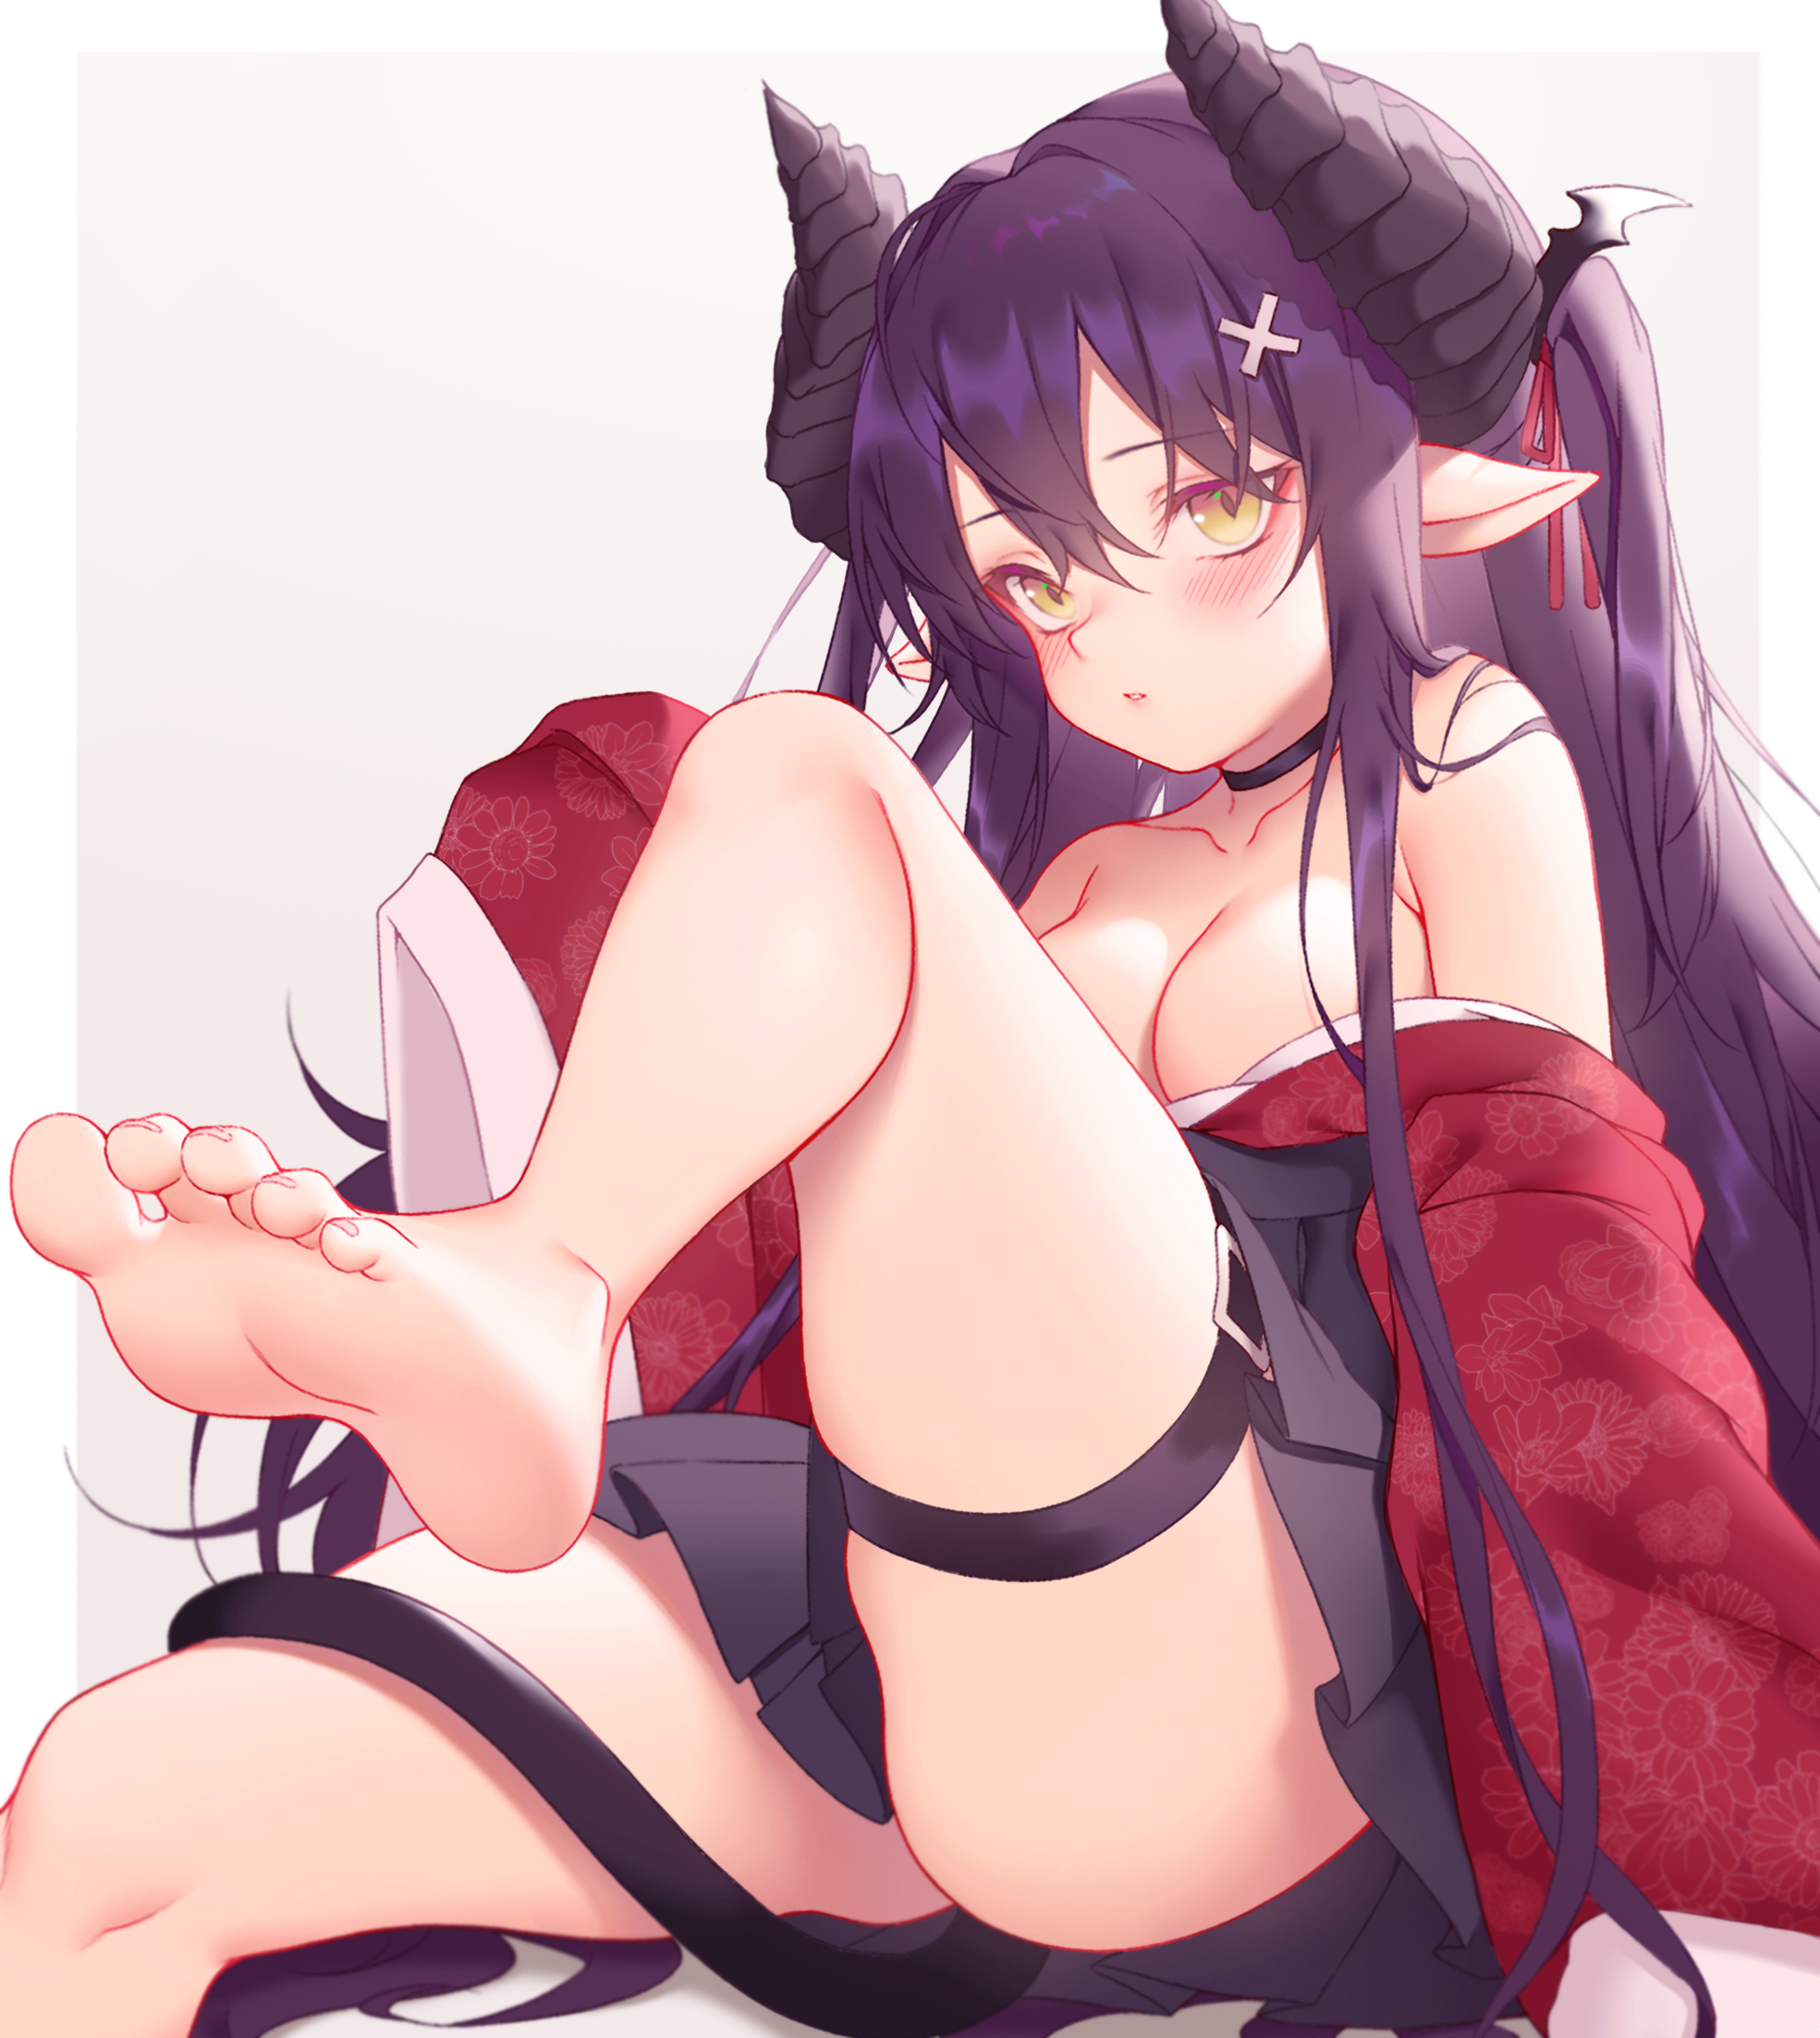 Anime 1969x2205 anime anime girls digital art artwork 2D portrait display Zhaofeng Yinyue Japanese clothes open clothes cleavage feet horns pointy ears purple hair